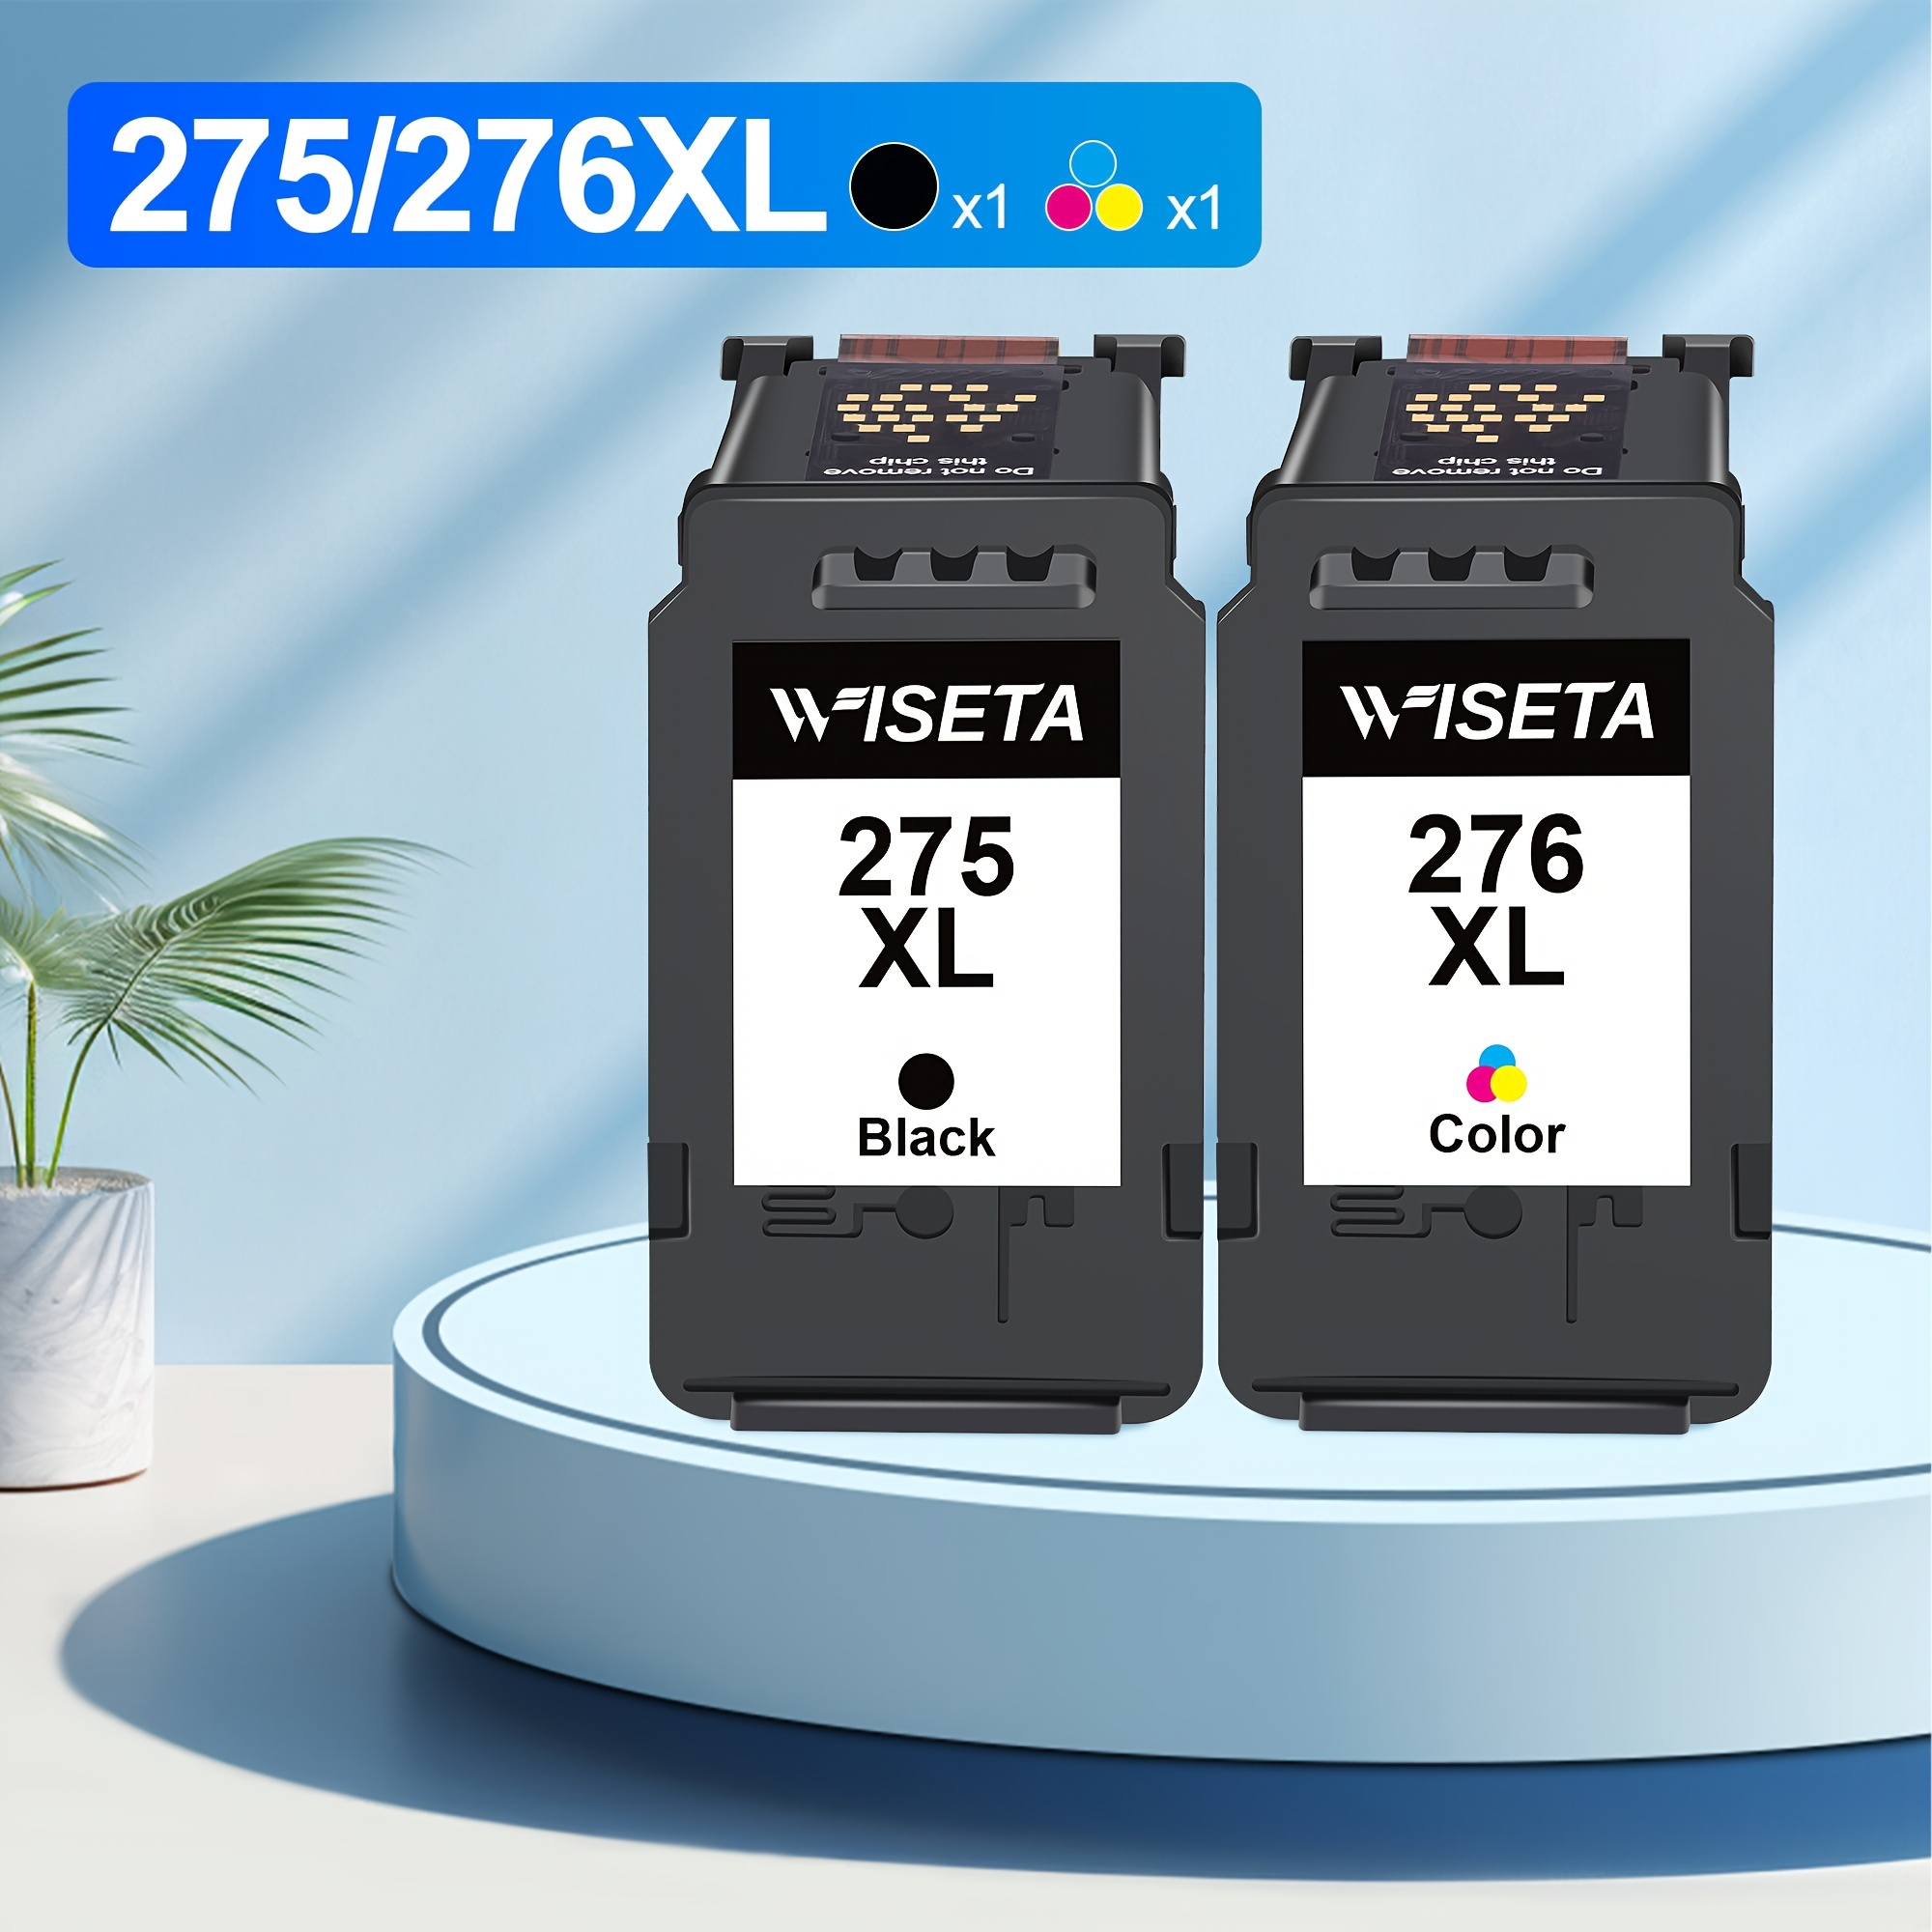 

2 Pack, Black And Tricolor 275xl 276xl Remanufactured Ink Cartridge Replacement For 275xl 276xl Works With Tr4720 Ts3520 Ts3500 Tr4700 Series Printers